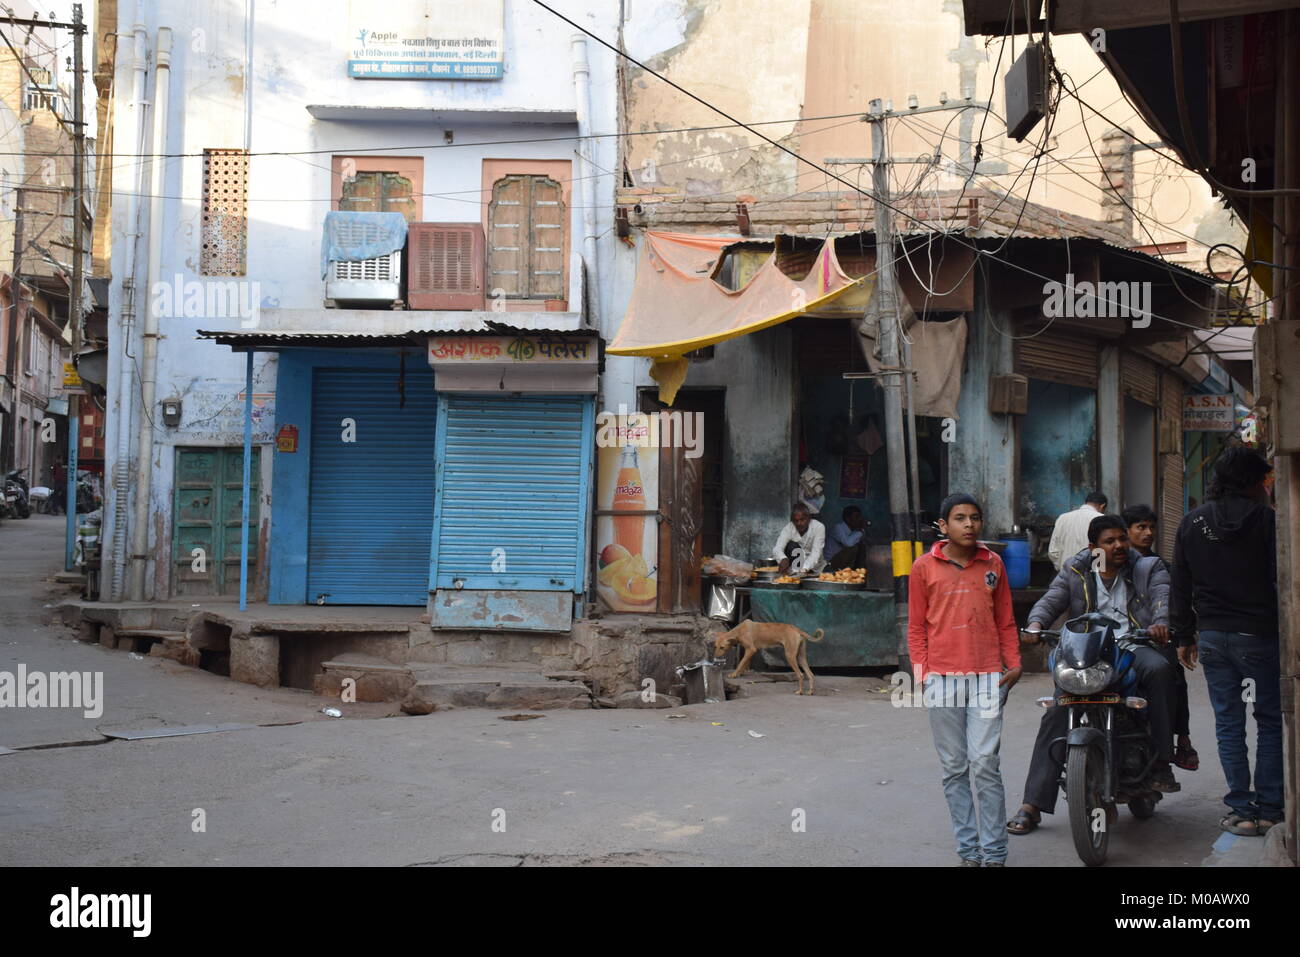 View of a busy street with people and shop in Bikaner, Rajasthan - India  Stock Photo - Alamy